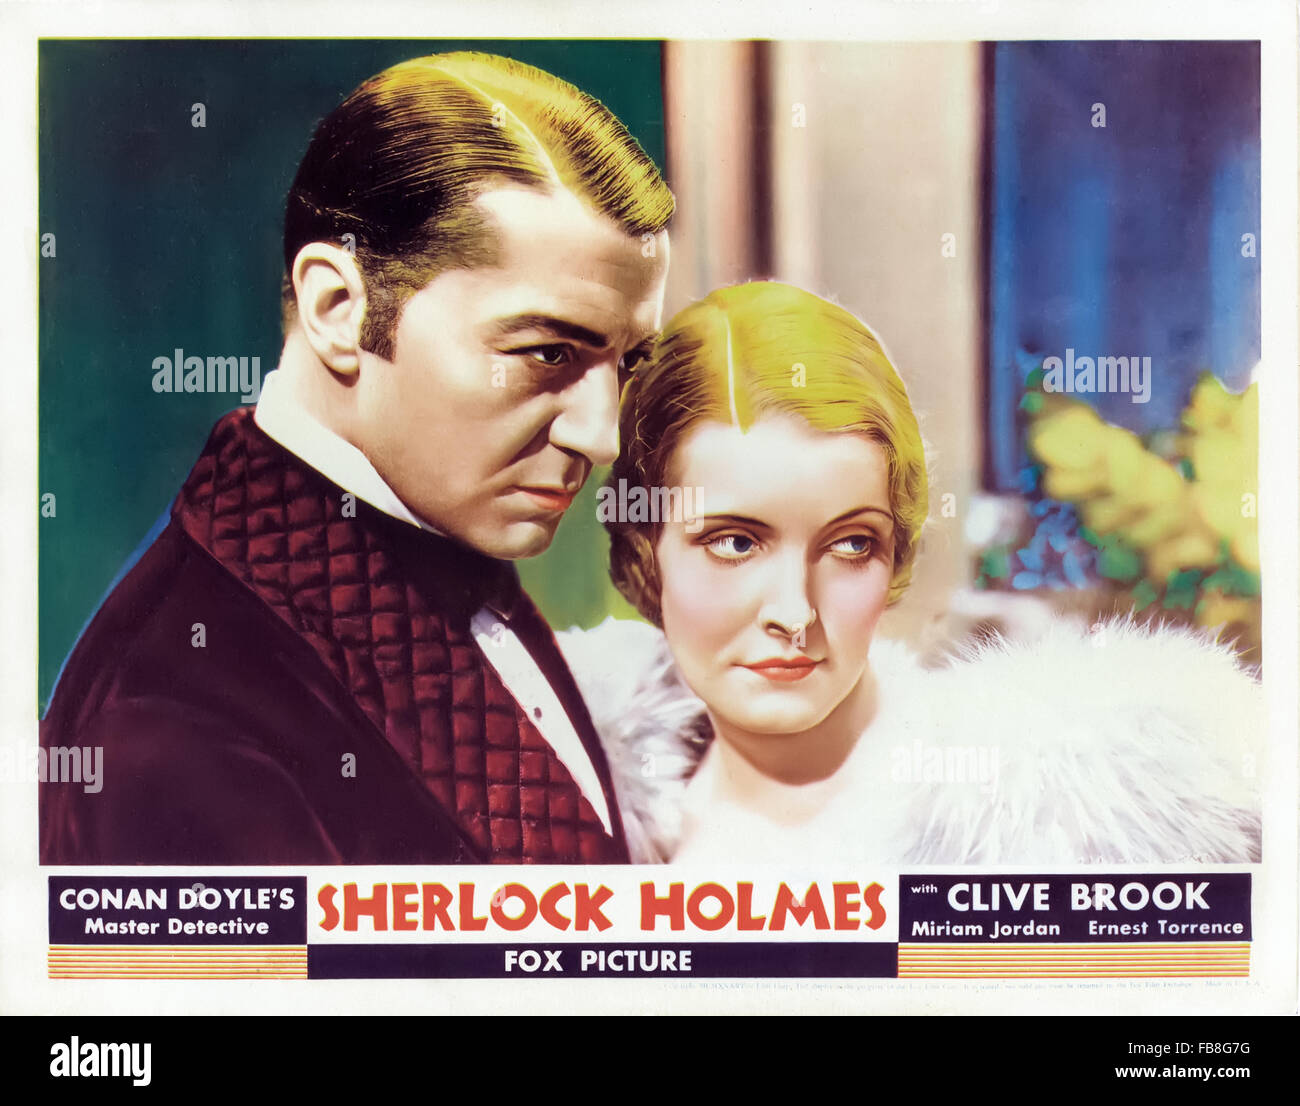 Still from 'Sherlock Holmes' 1932 film directed by William K. Howard and starring Clive Brook (Holmes) and Miriam Jordan (Alice Faulkner). Photograph of original lobby card. Stock Photo